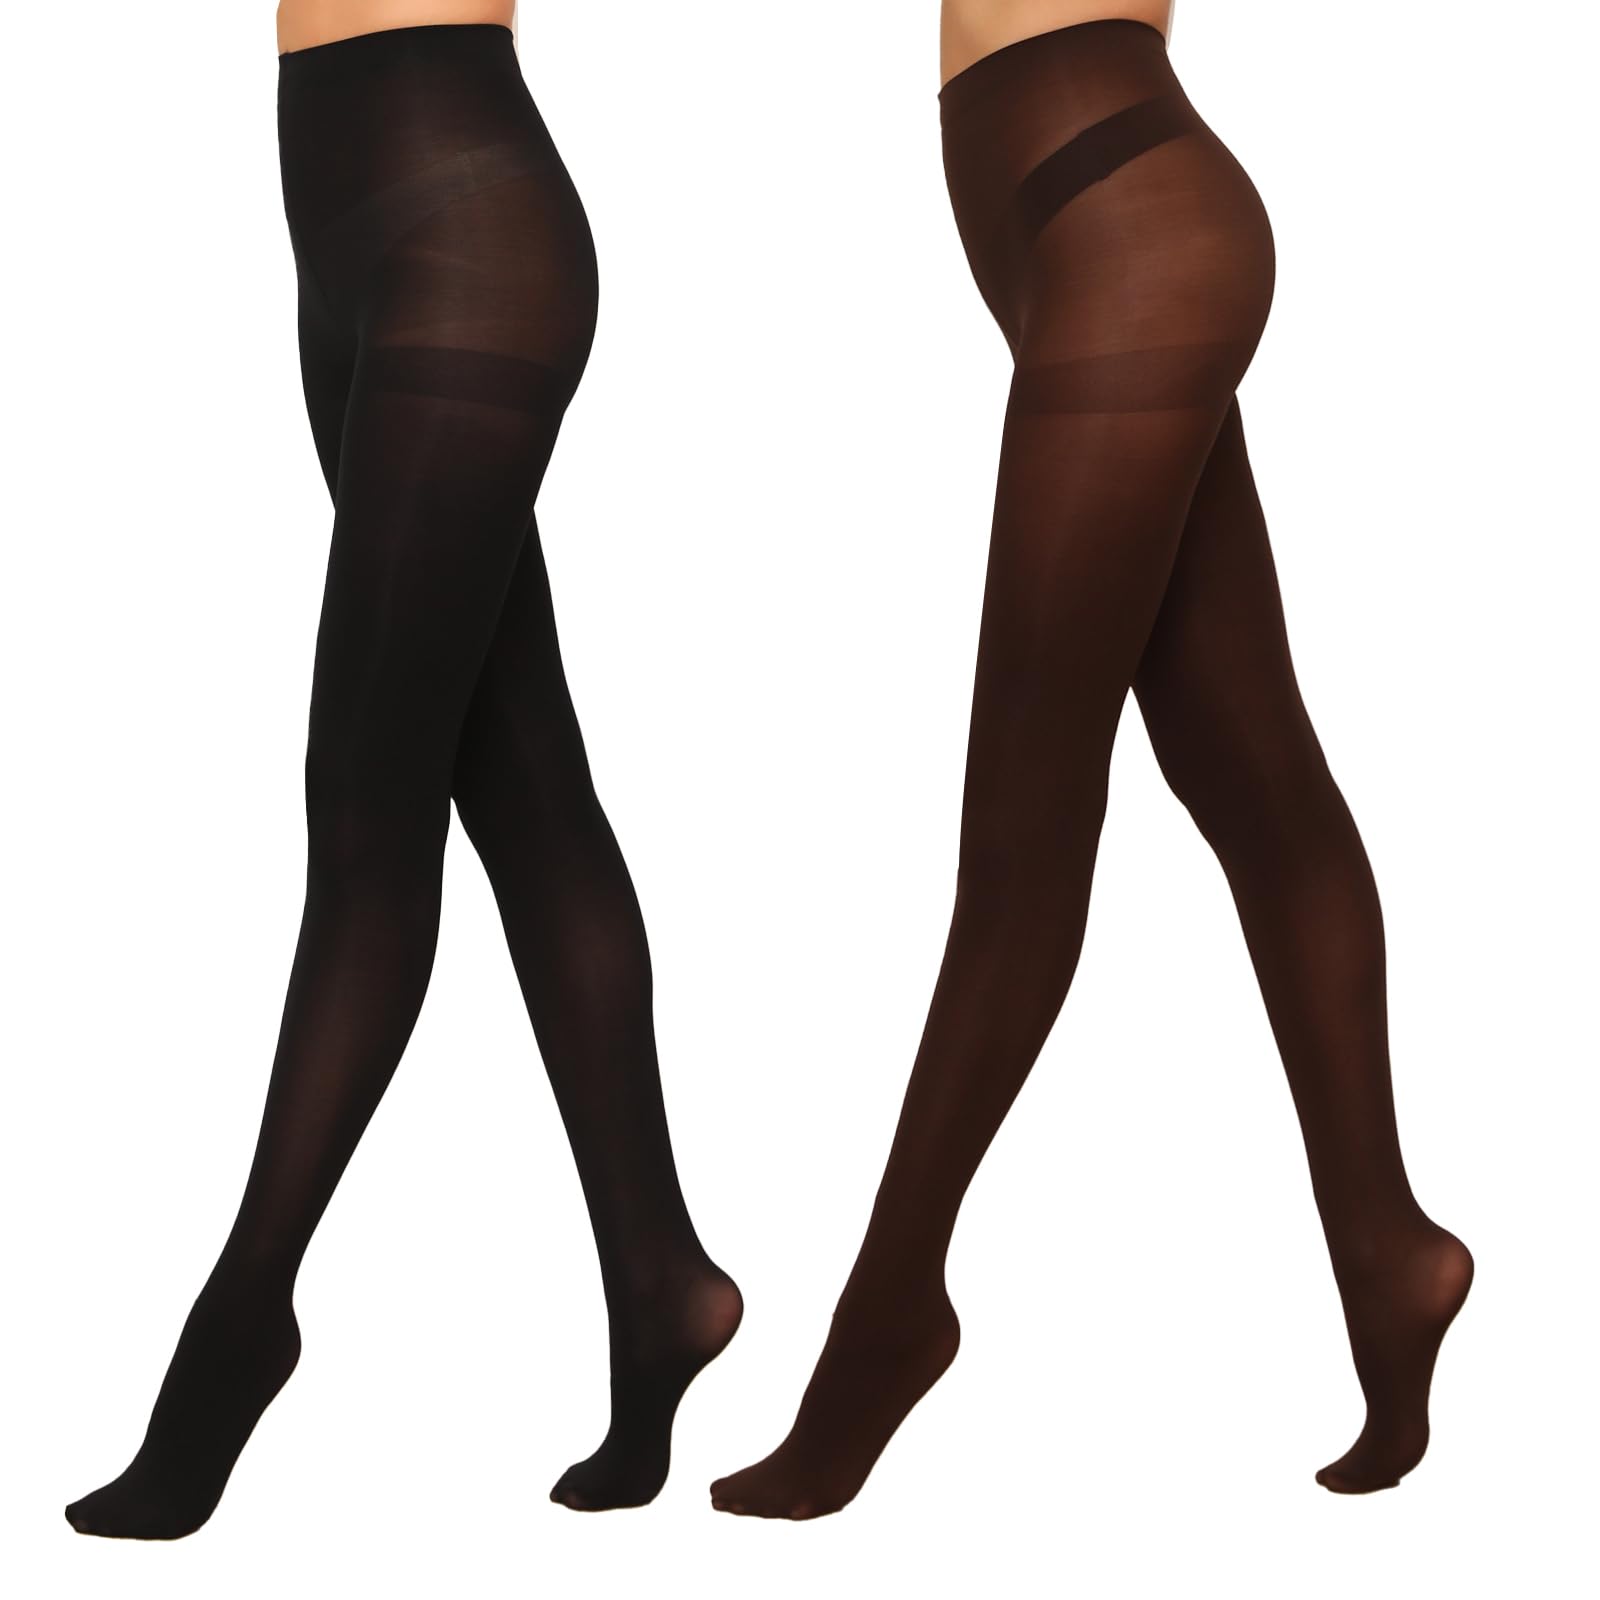 12 X YAGAXI SEMI OPAQUE CONTROL TOP PANTYHOSE FOR WOMEN - 2 PAIRS HIGH WAIST 40D WOMEN'S TIGHTS(COFFEE,L) - TOTAL RRP £120: LOCATION - RACK D